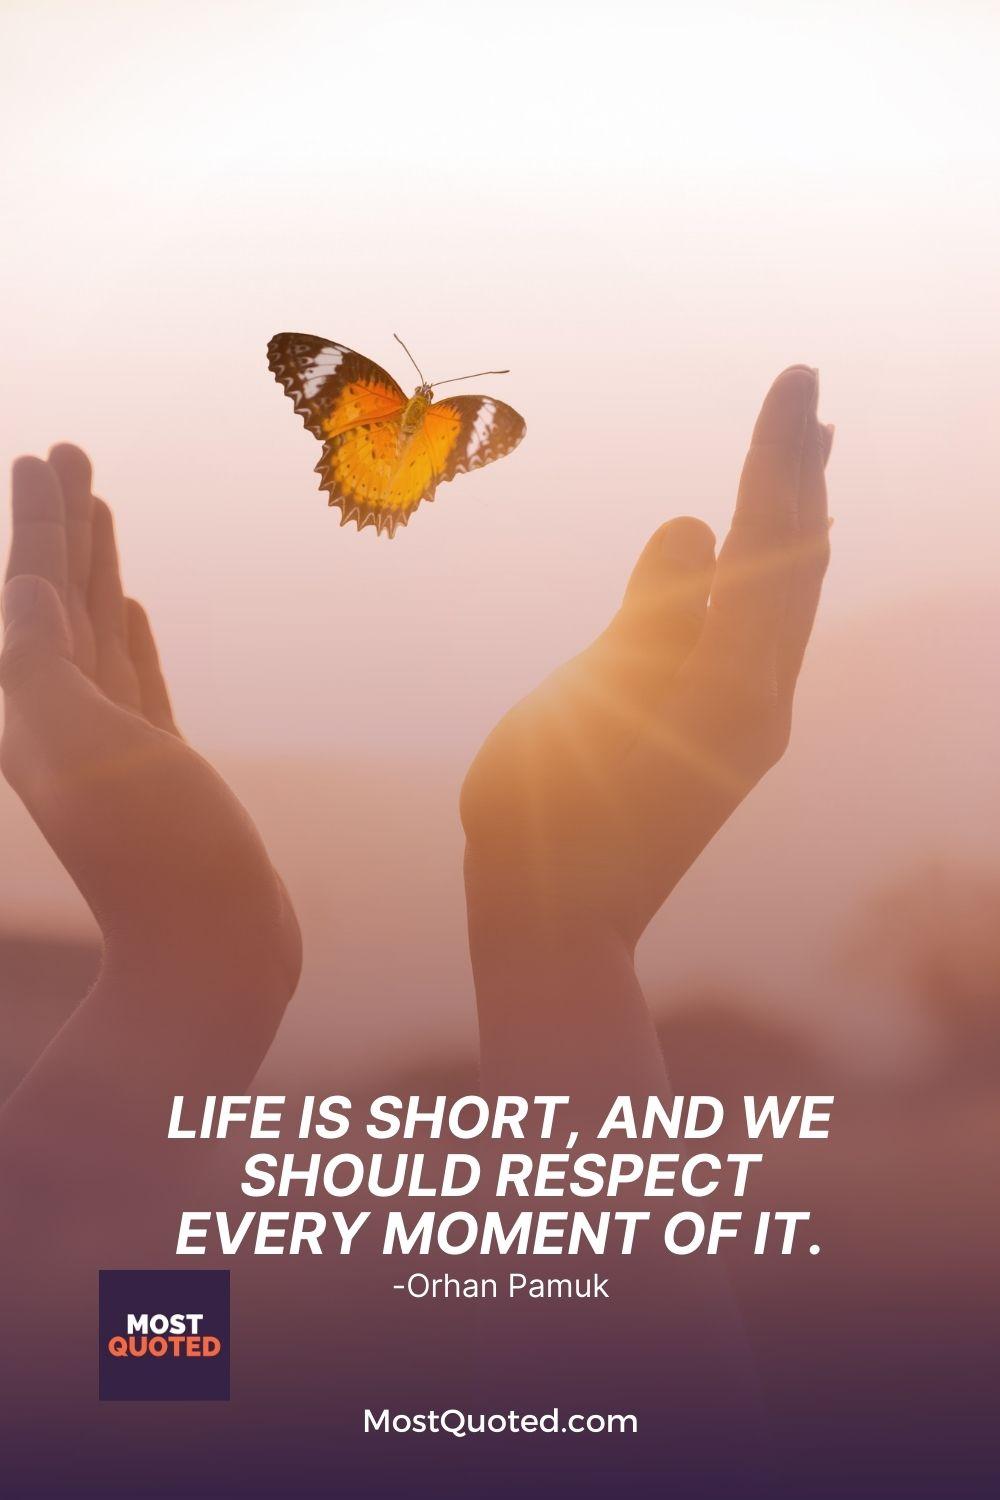 Life is short, and we should respect every moment of it. - Orhan Pamuk